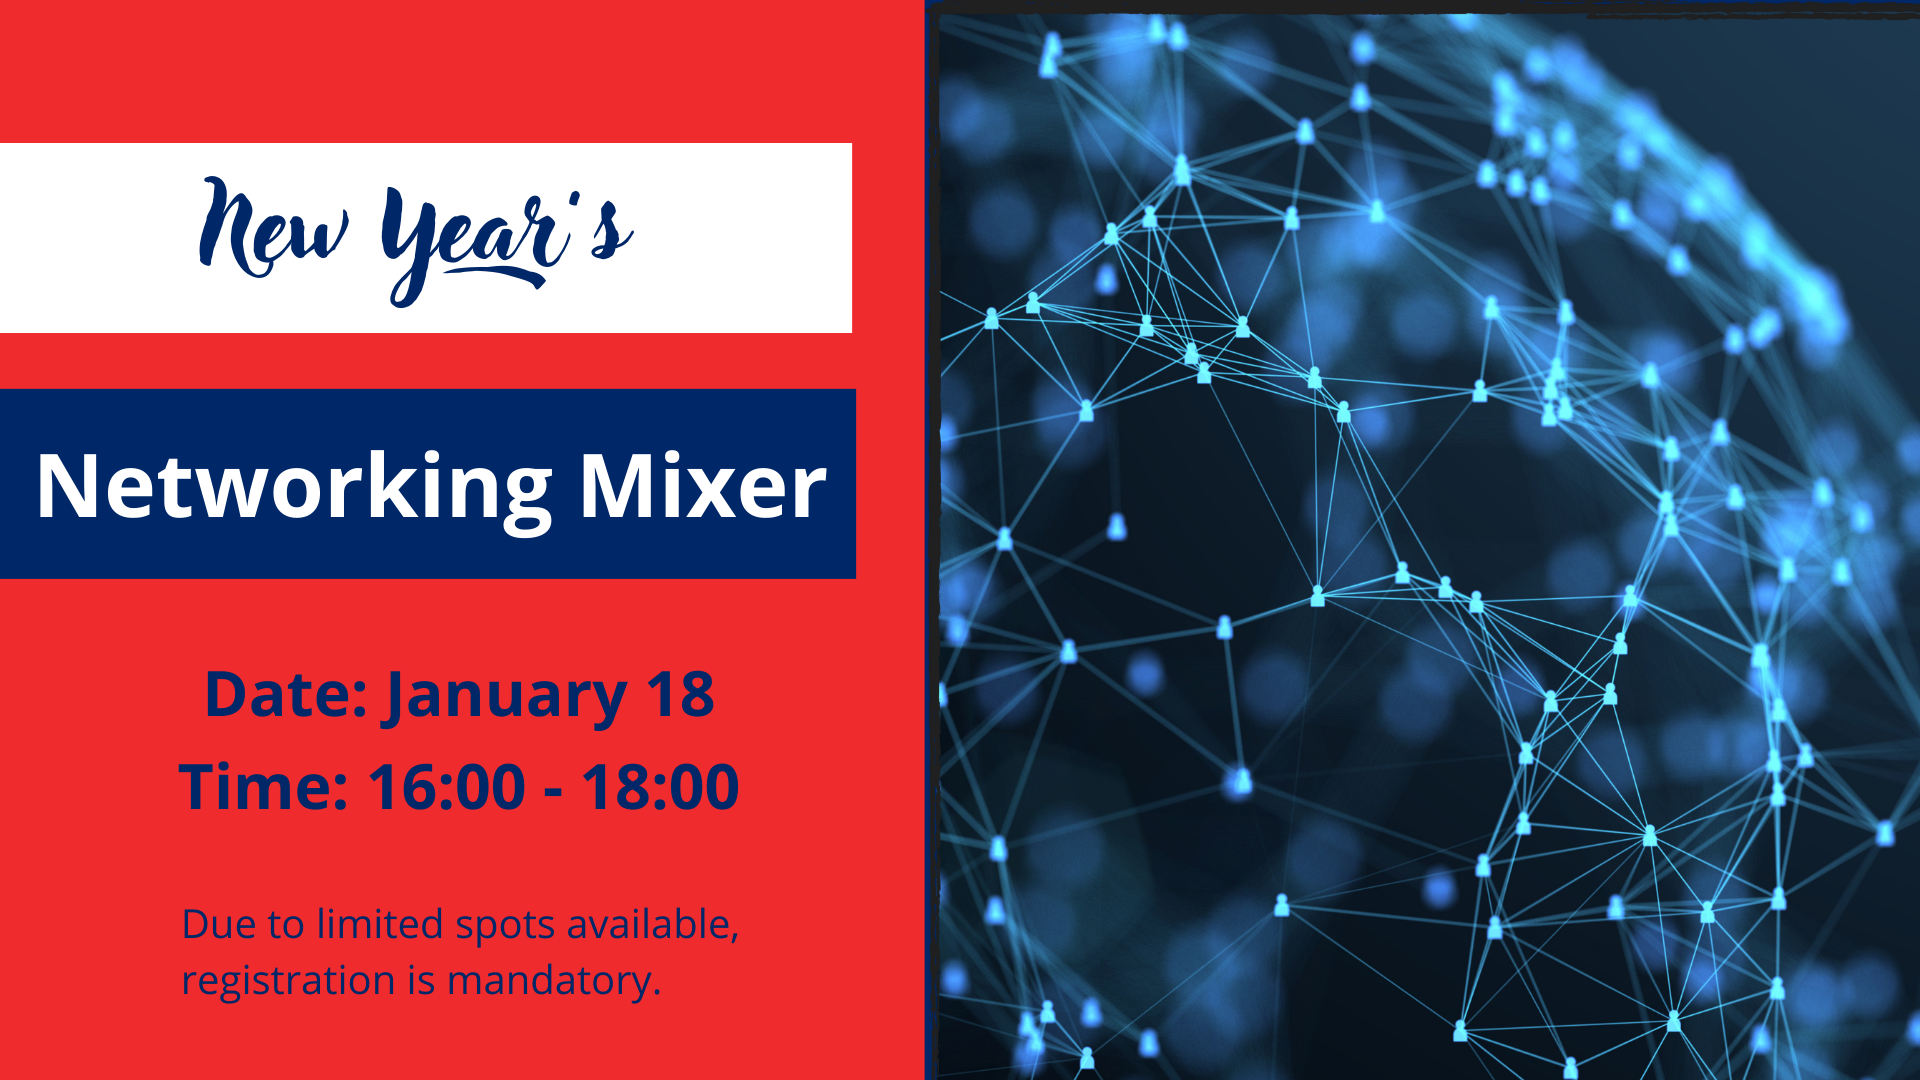 New Year's Networking Mixer